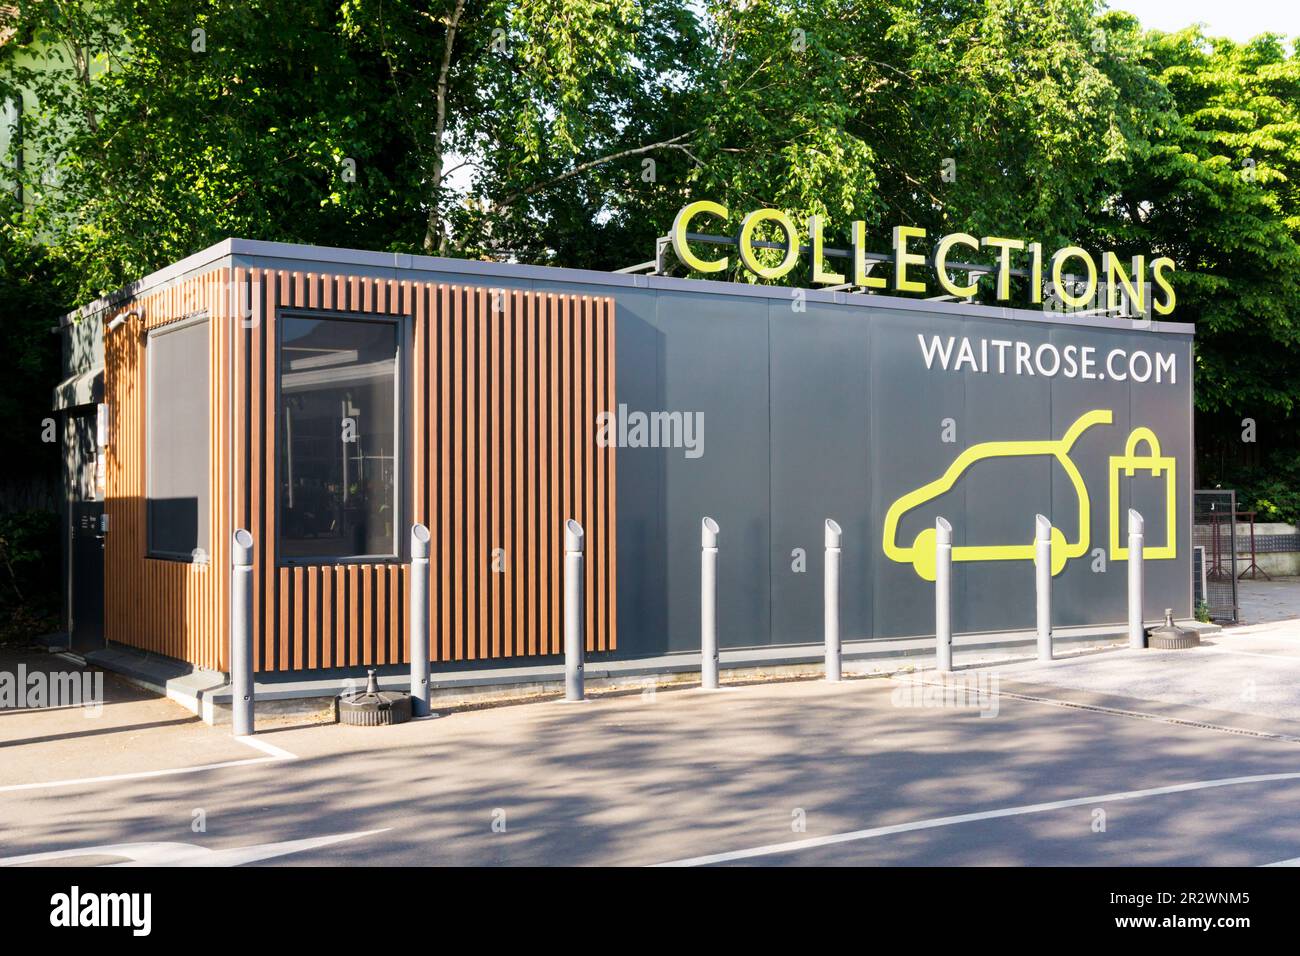 Waitrose click & collect collection point in supermarket car park. Stock Photo